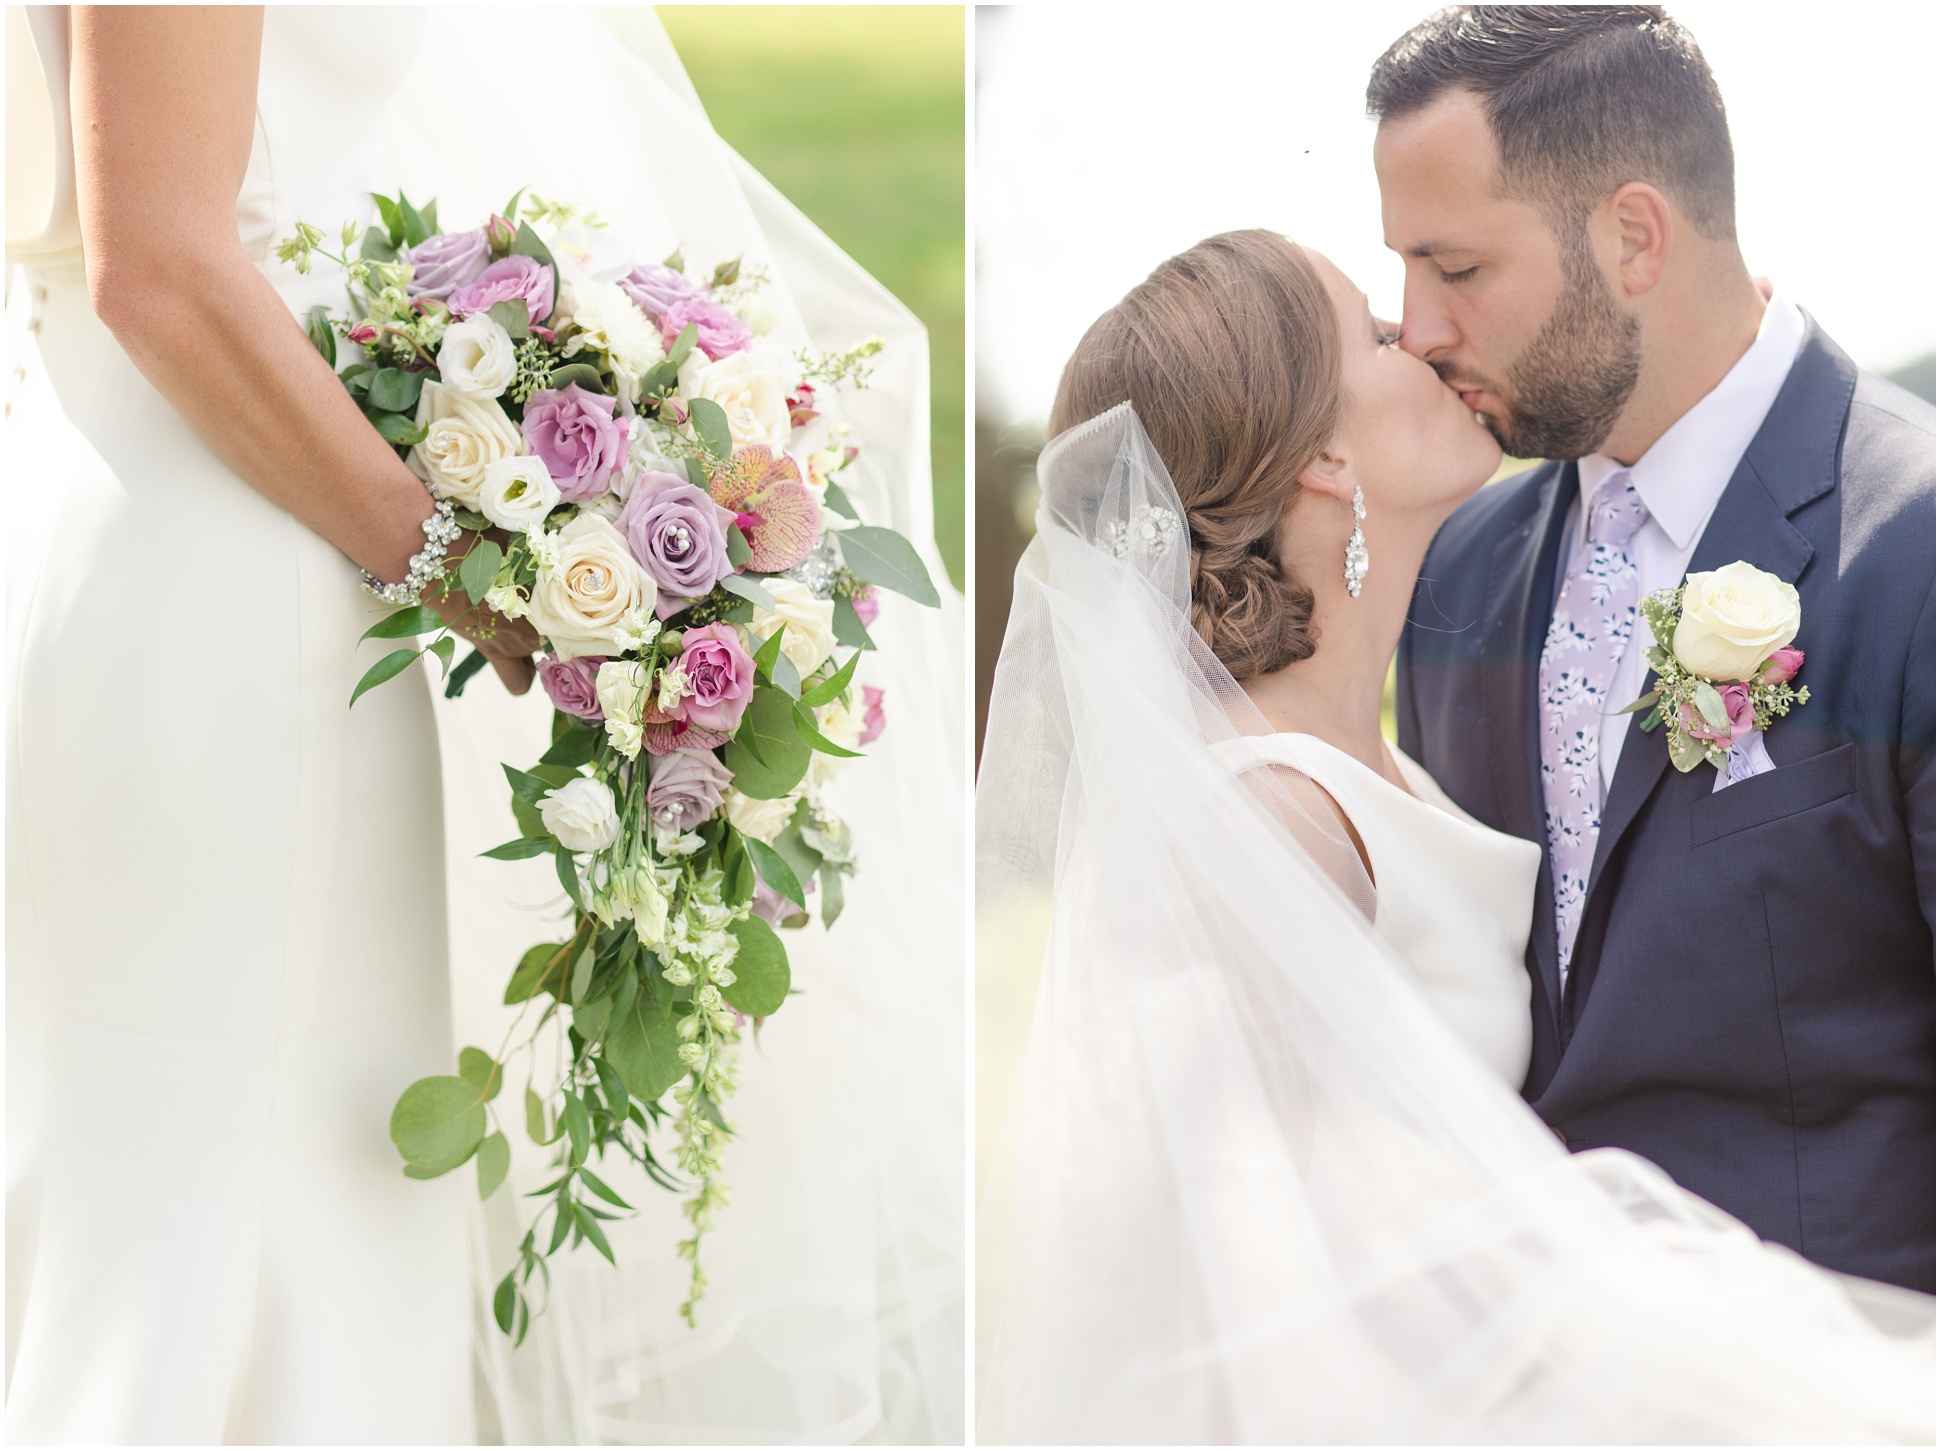 Left: Bride holding bouquet, Right: Bride and groom kissing